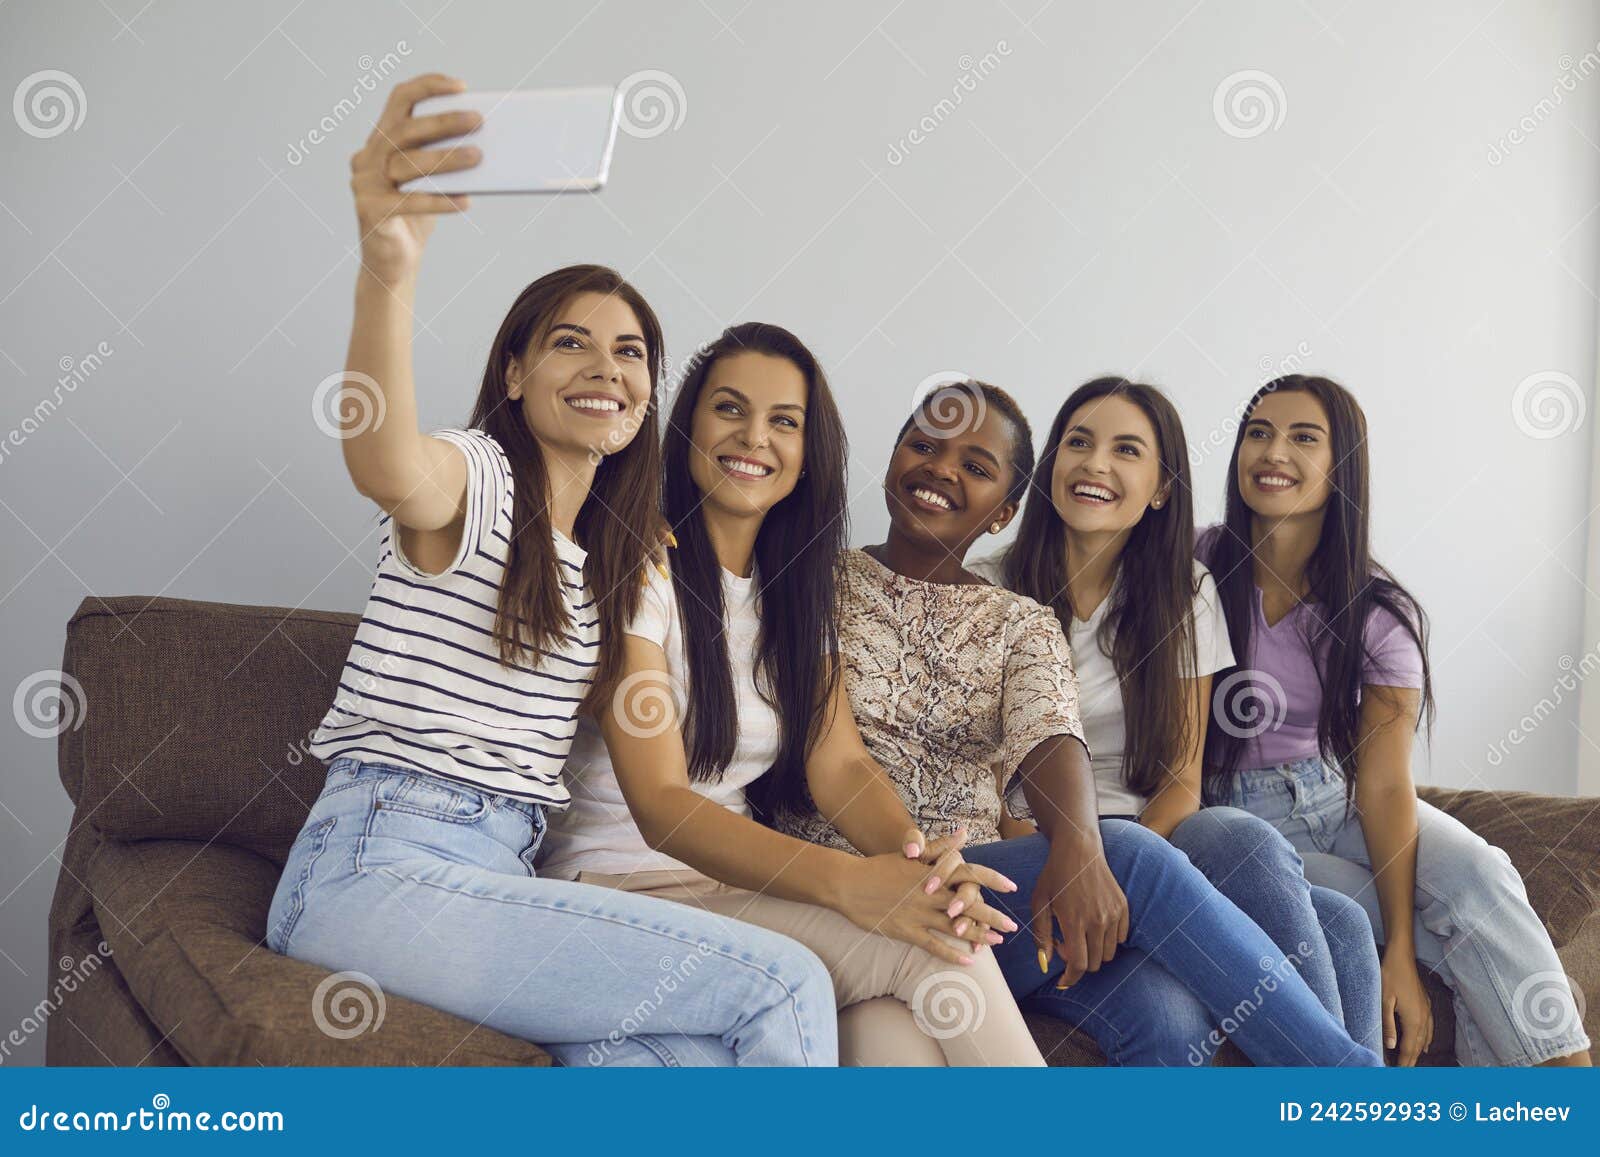 Multiracial Female Best Friends Take Selfies Together And Capture